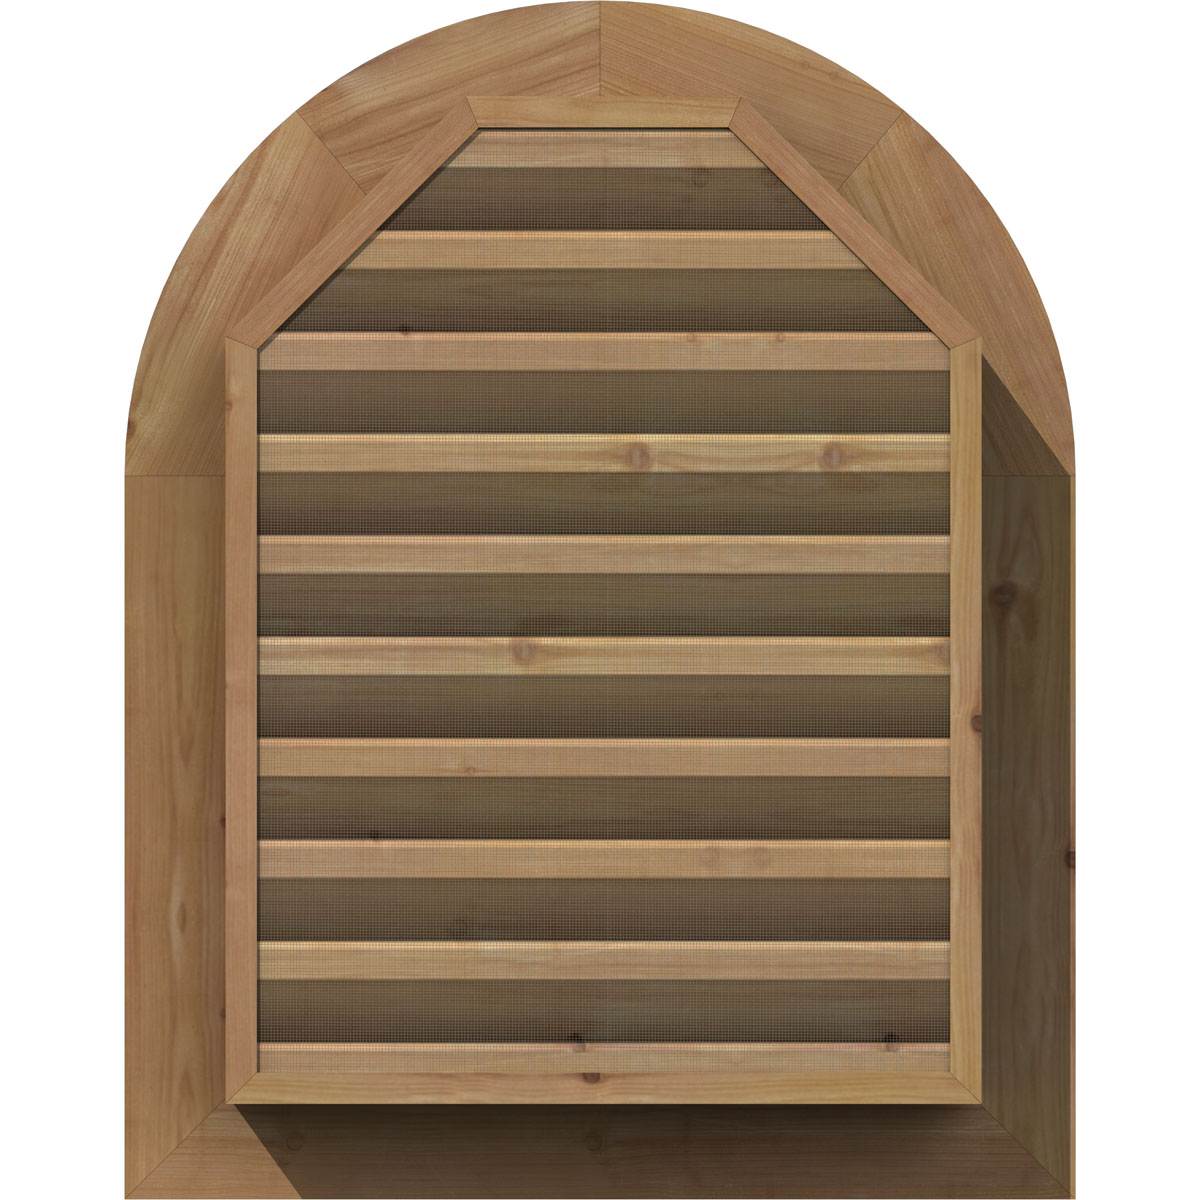 12"W x 32"H Round Top Gable Vent (17"W x 37"H Frame Size): Unfinished, Functional, Smooth Western Red Cedar Gable Vent w/ Brick Mould Face Frame - image 4 of 12